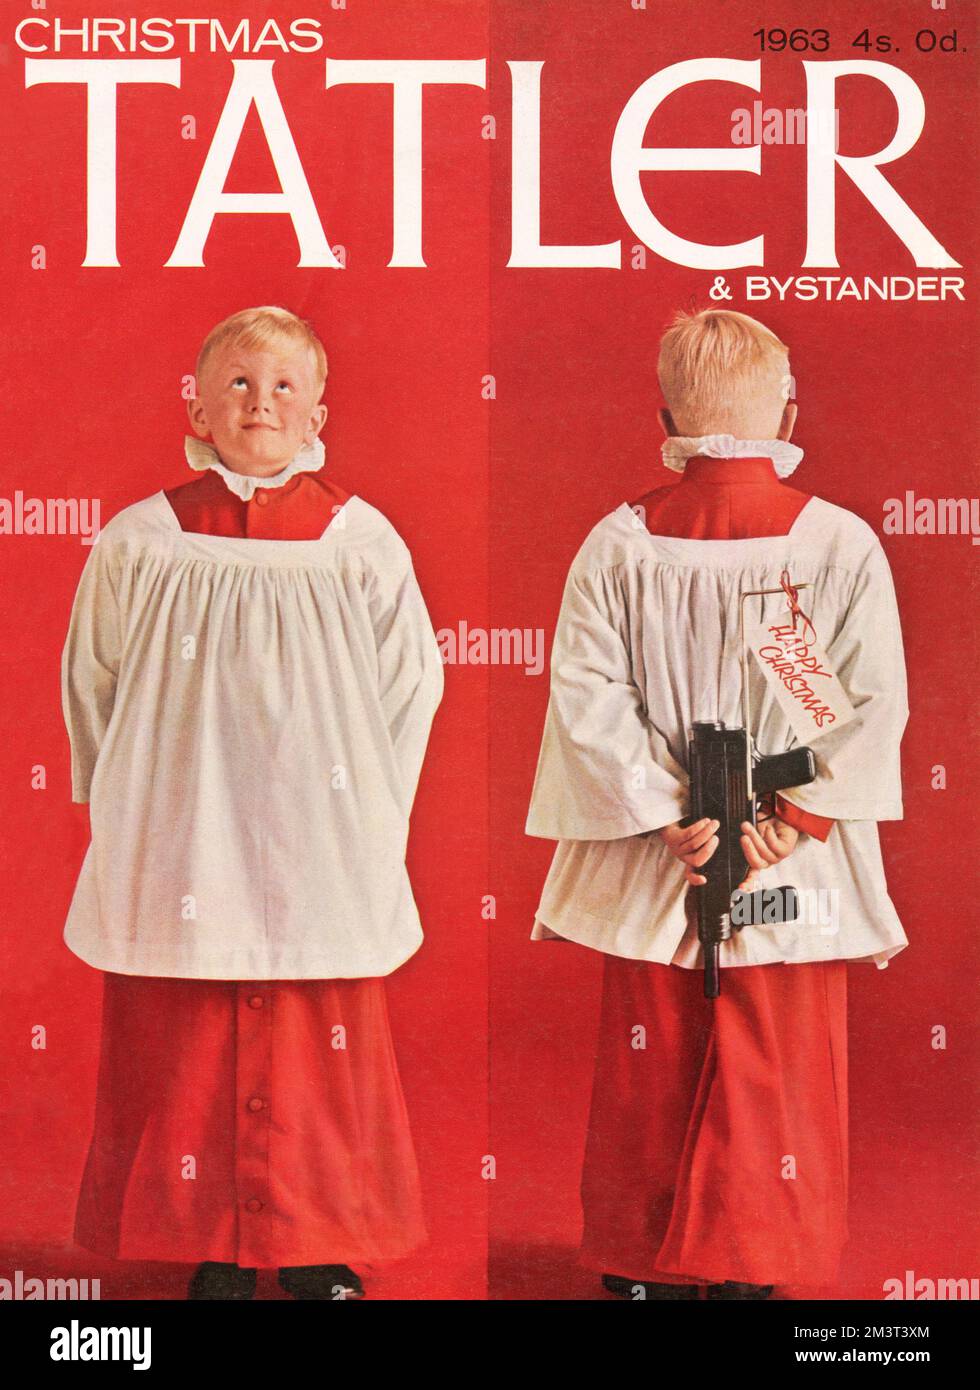 As the magazine itself describes it: 'The smile on the face of a tiger would warn off the least wary but the smile on the face of a chorister is plainly to be trusted. That is until he turns away and discloses the means to enforce Christmas demands which come high these days.' Stock Photo